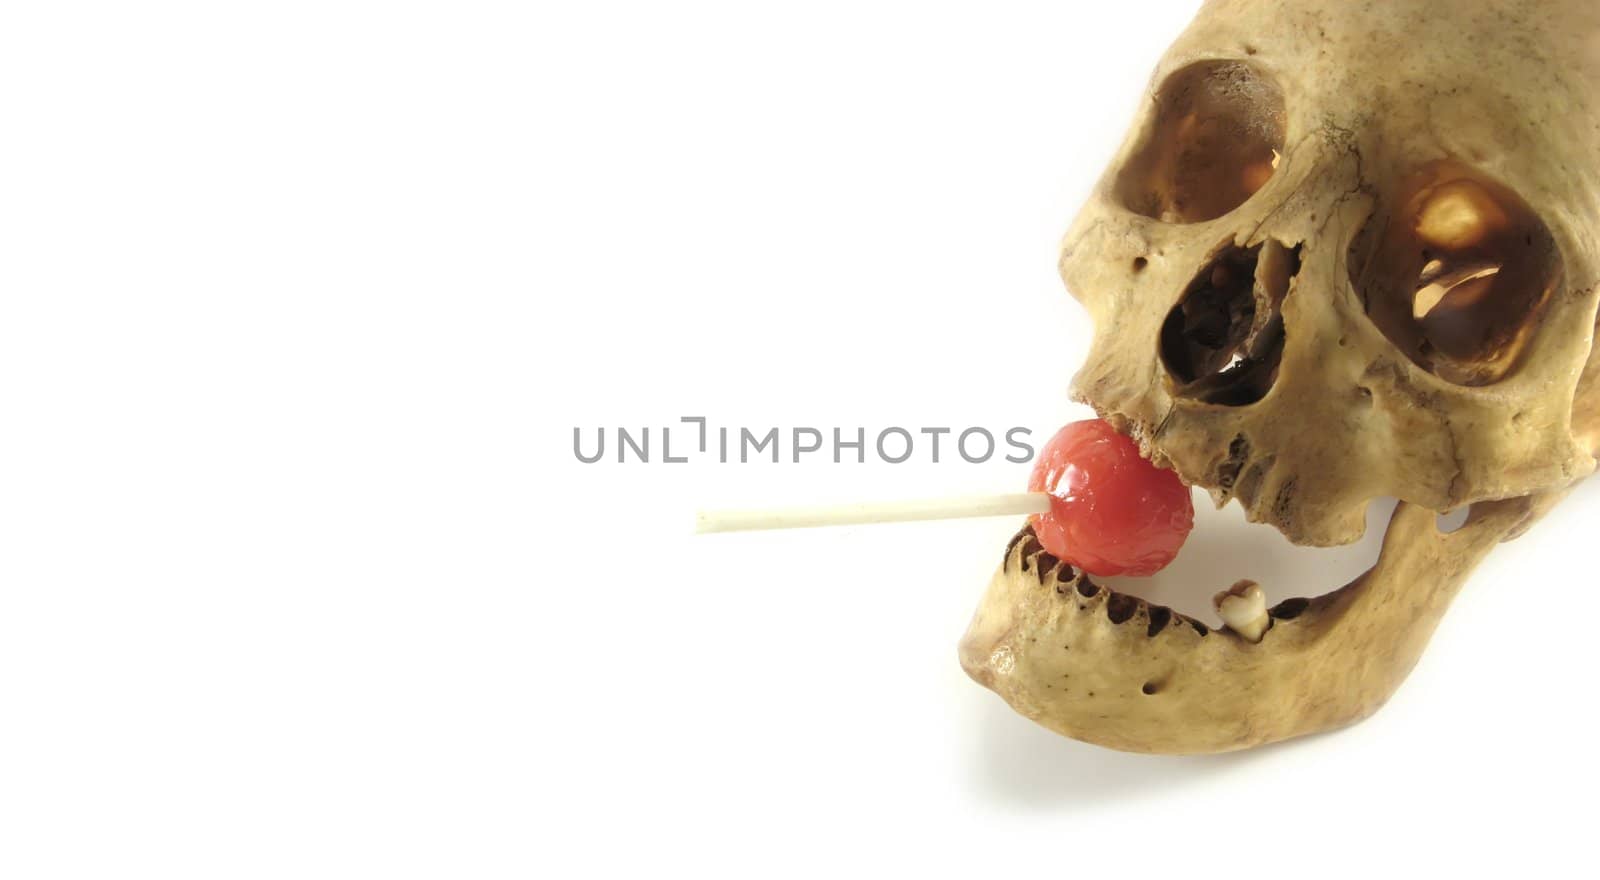 a halloween banner with skull and lollipop